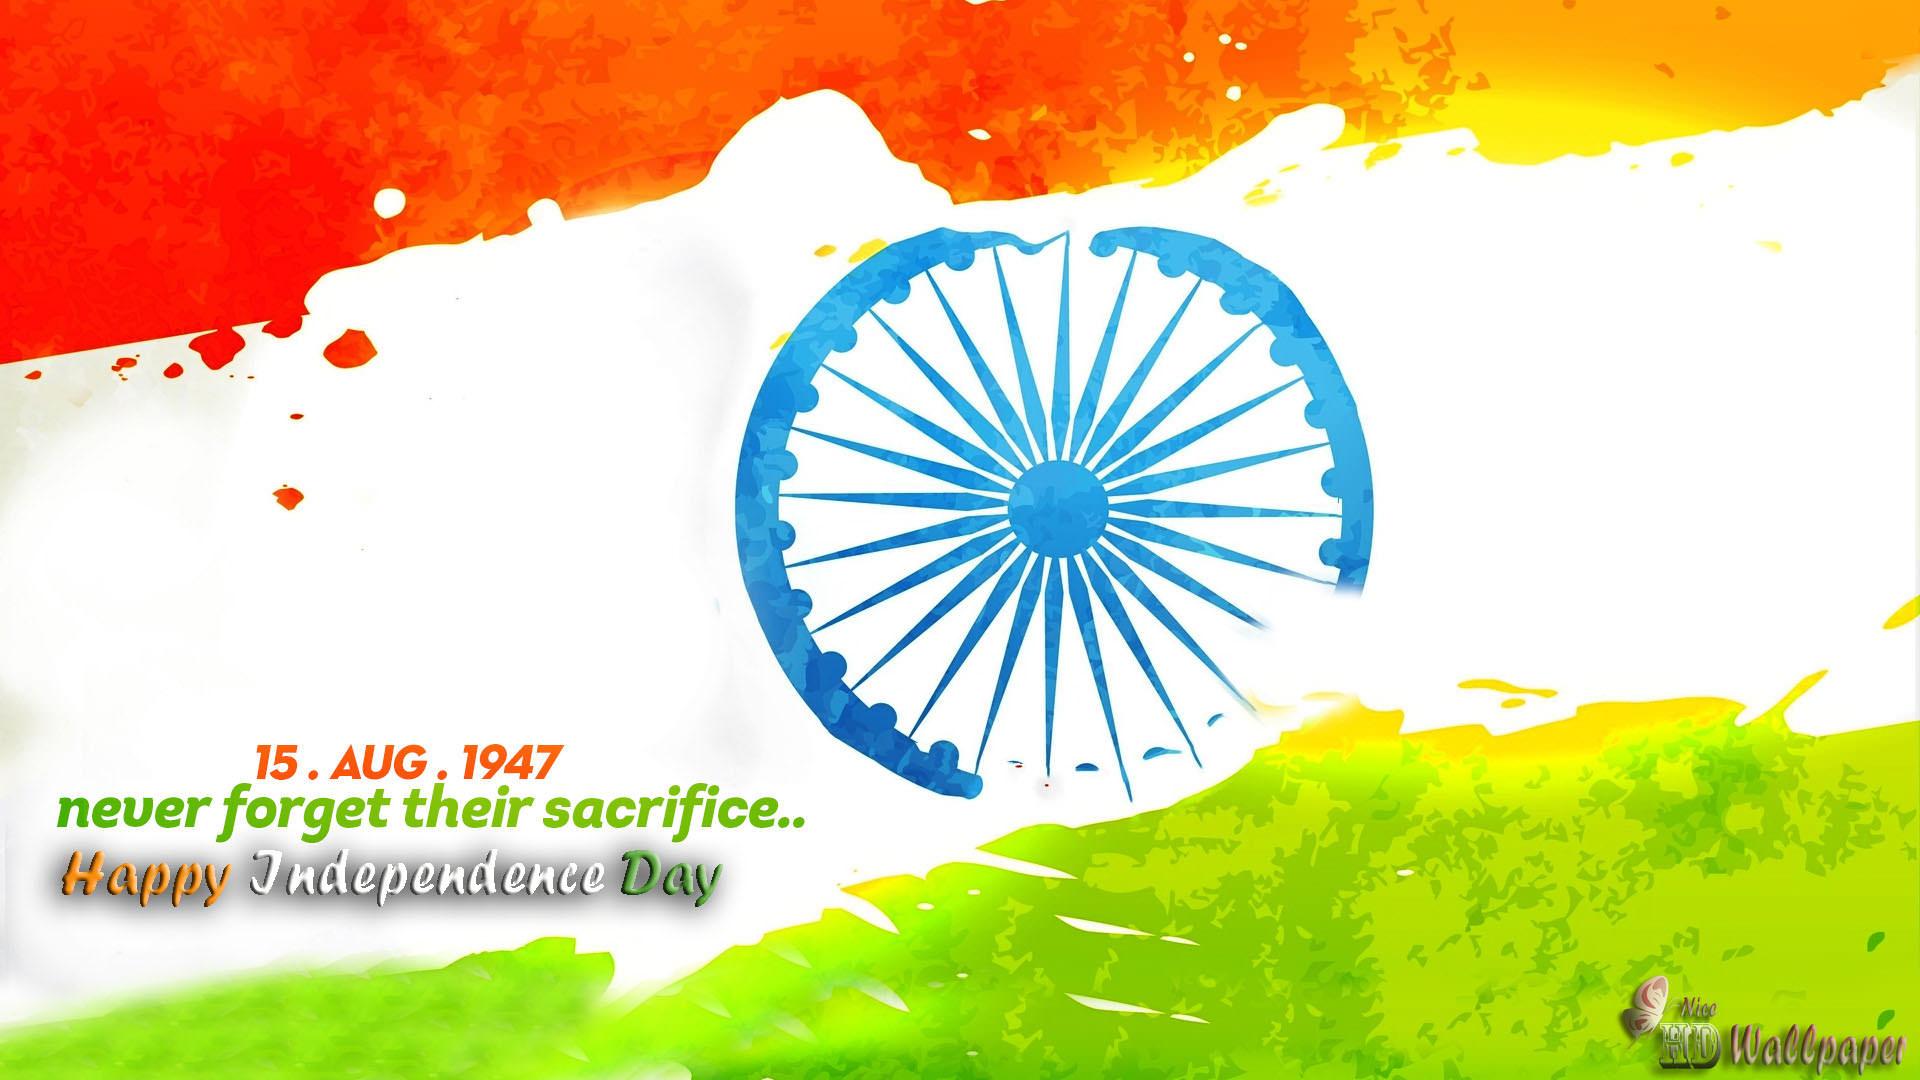 15 Augush 1947 Happy Independence Day Hd